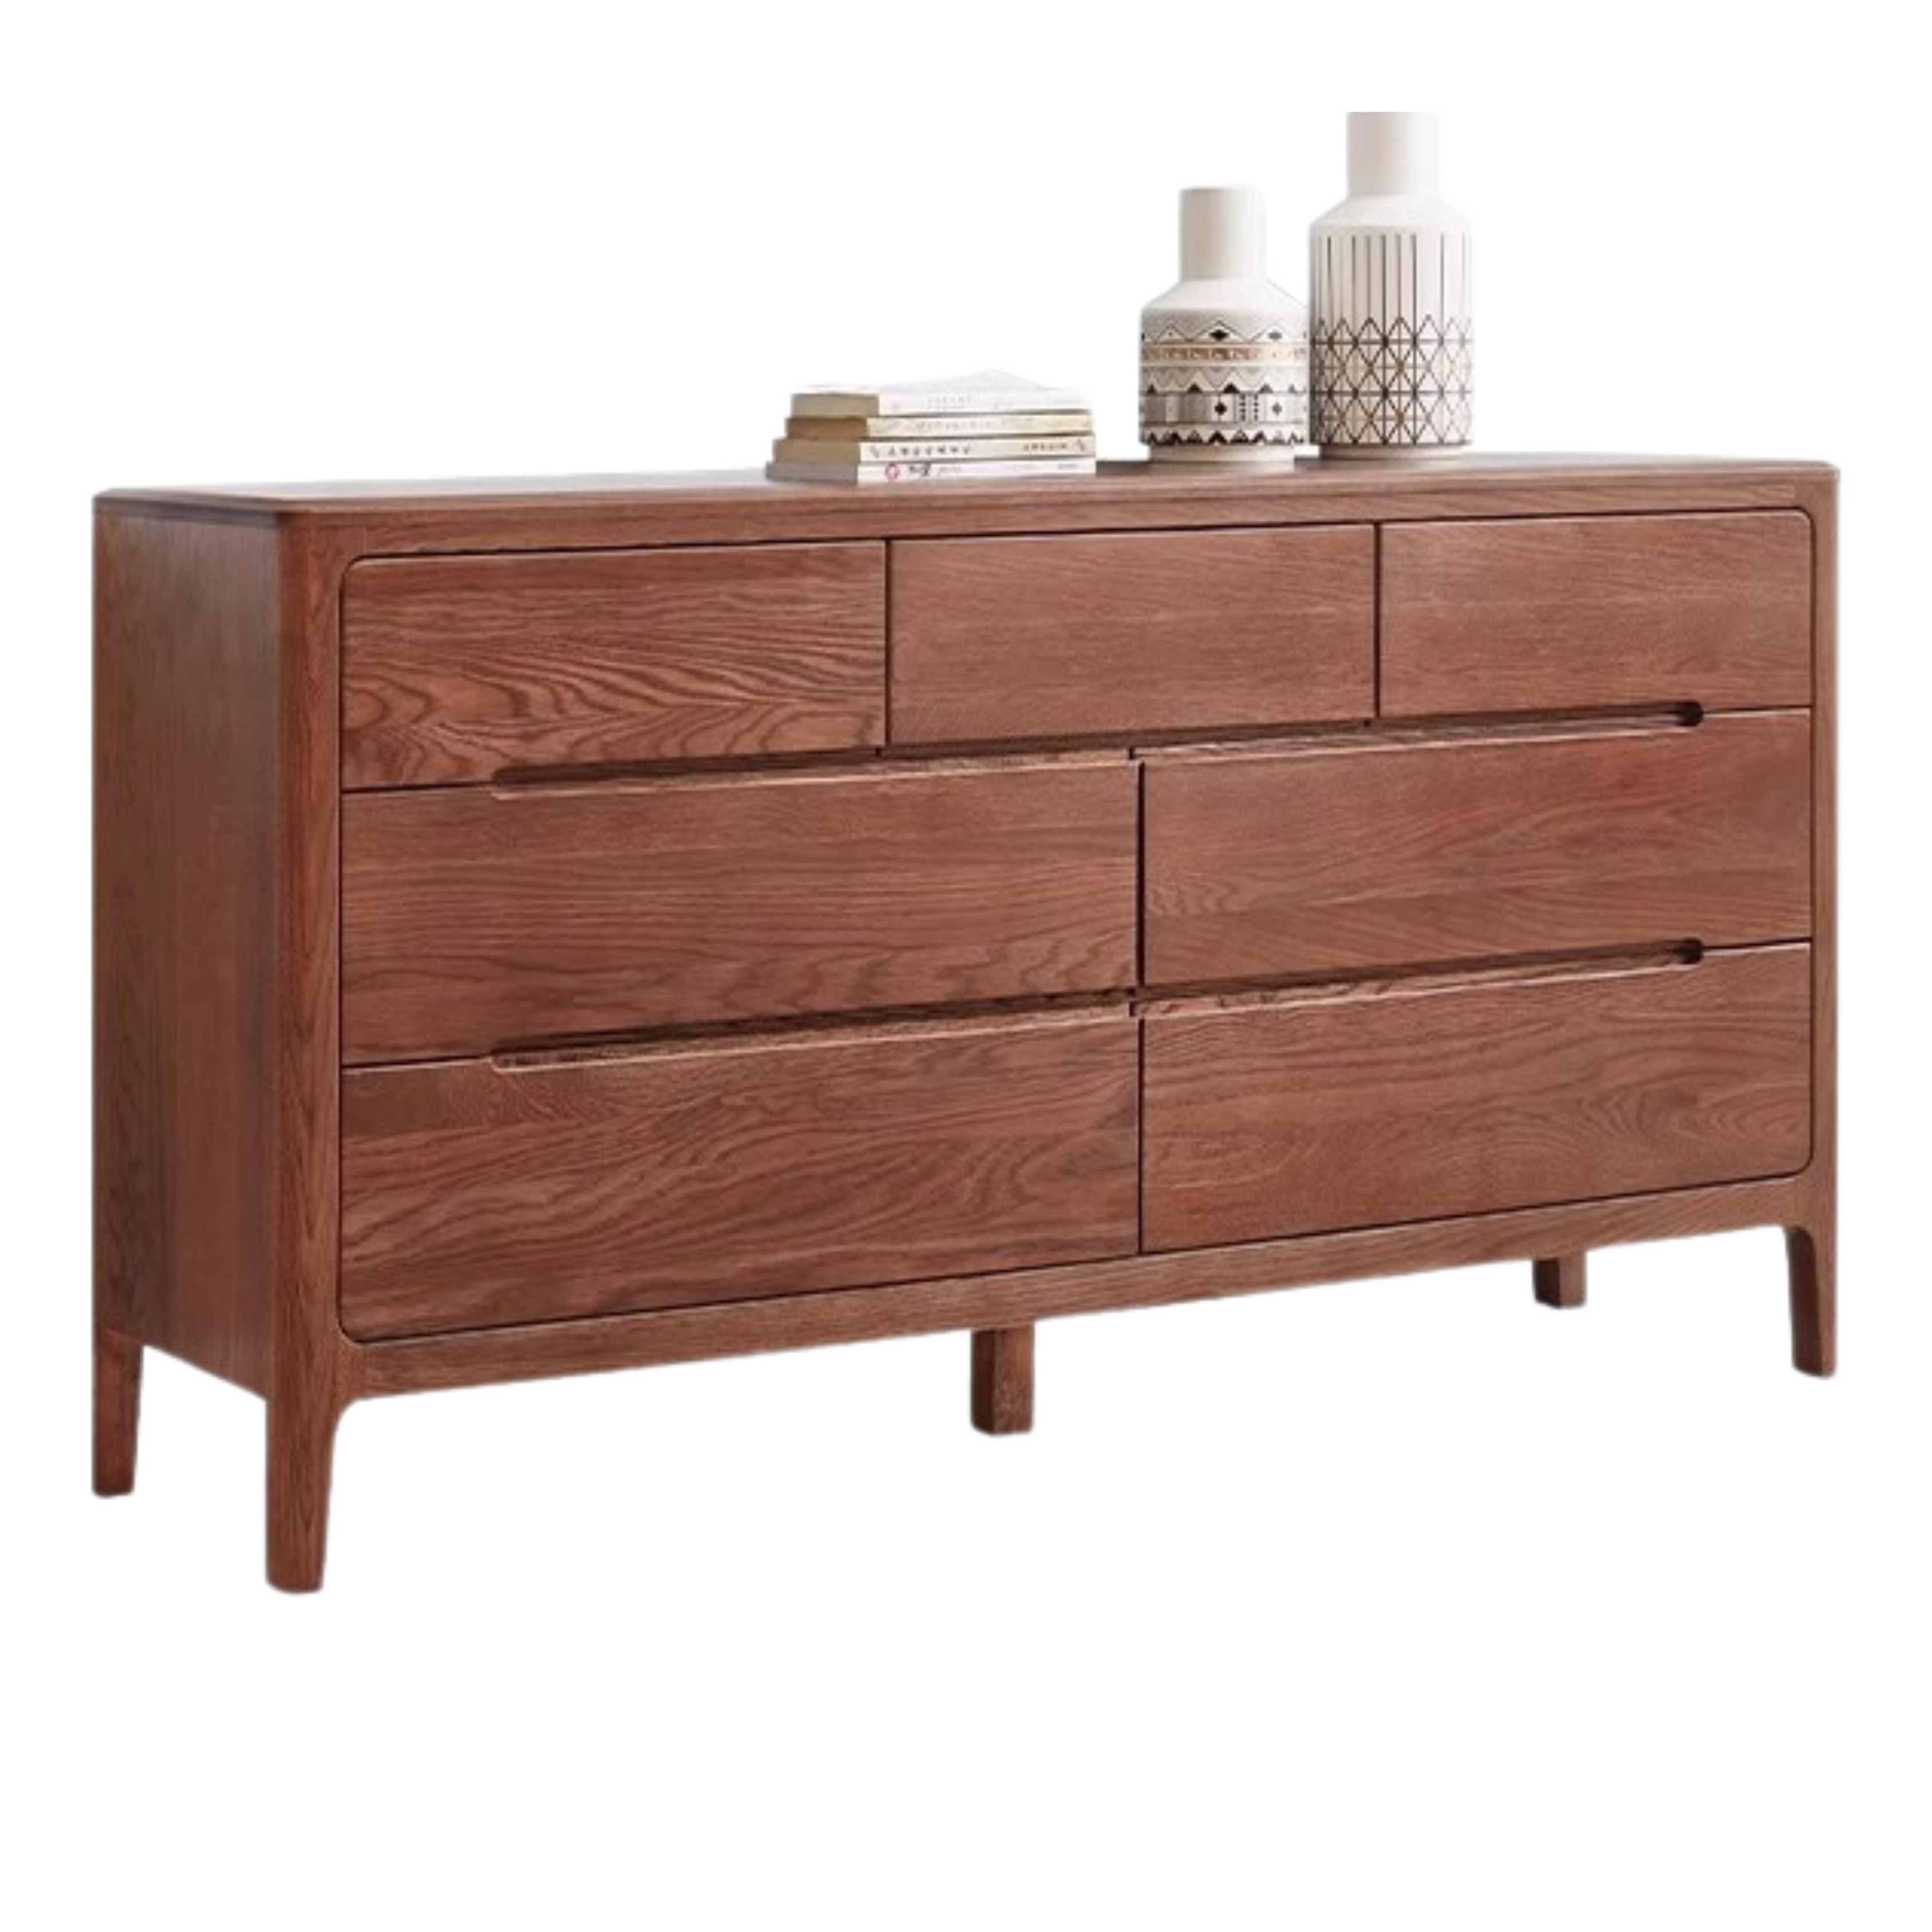 Oak Solid Wood Seattle wide chest of drawers)